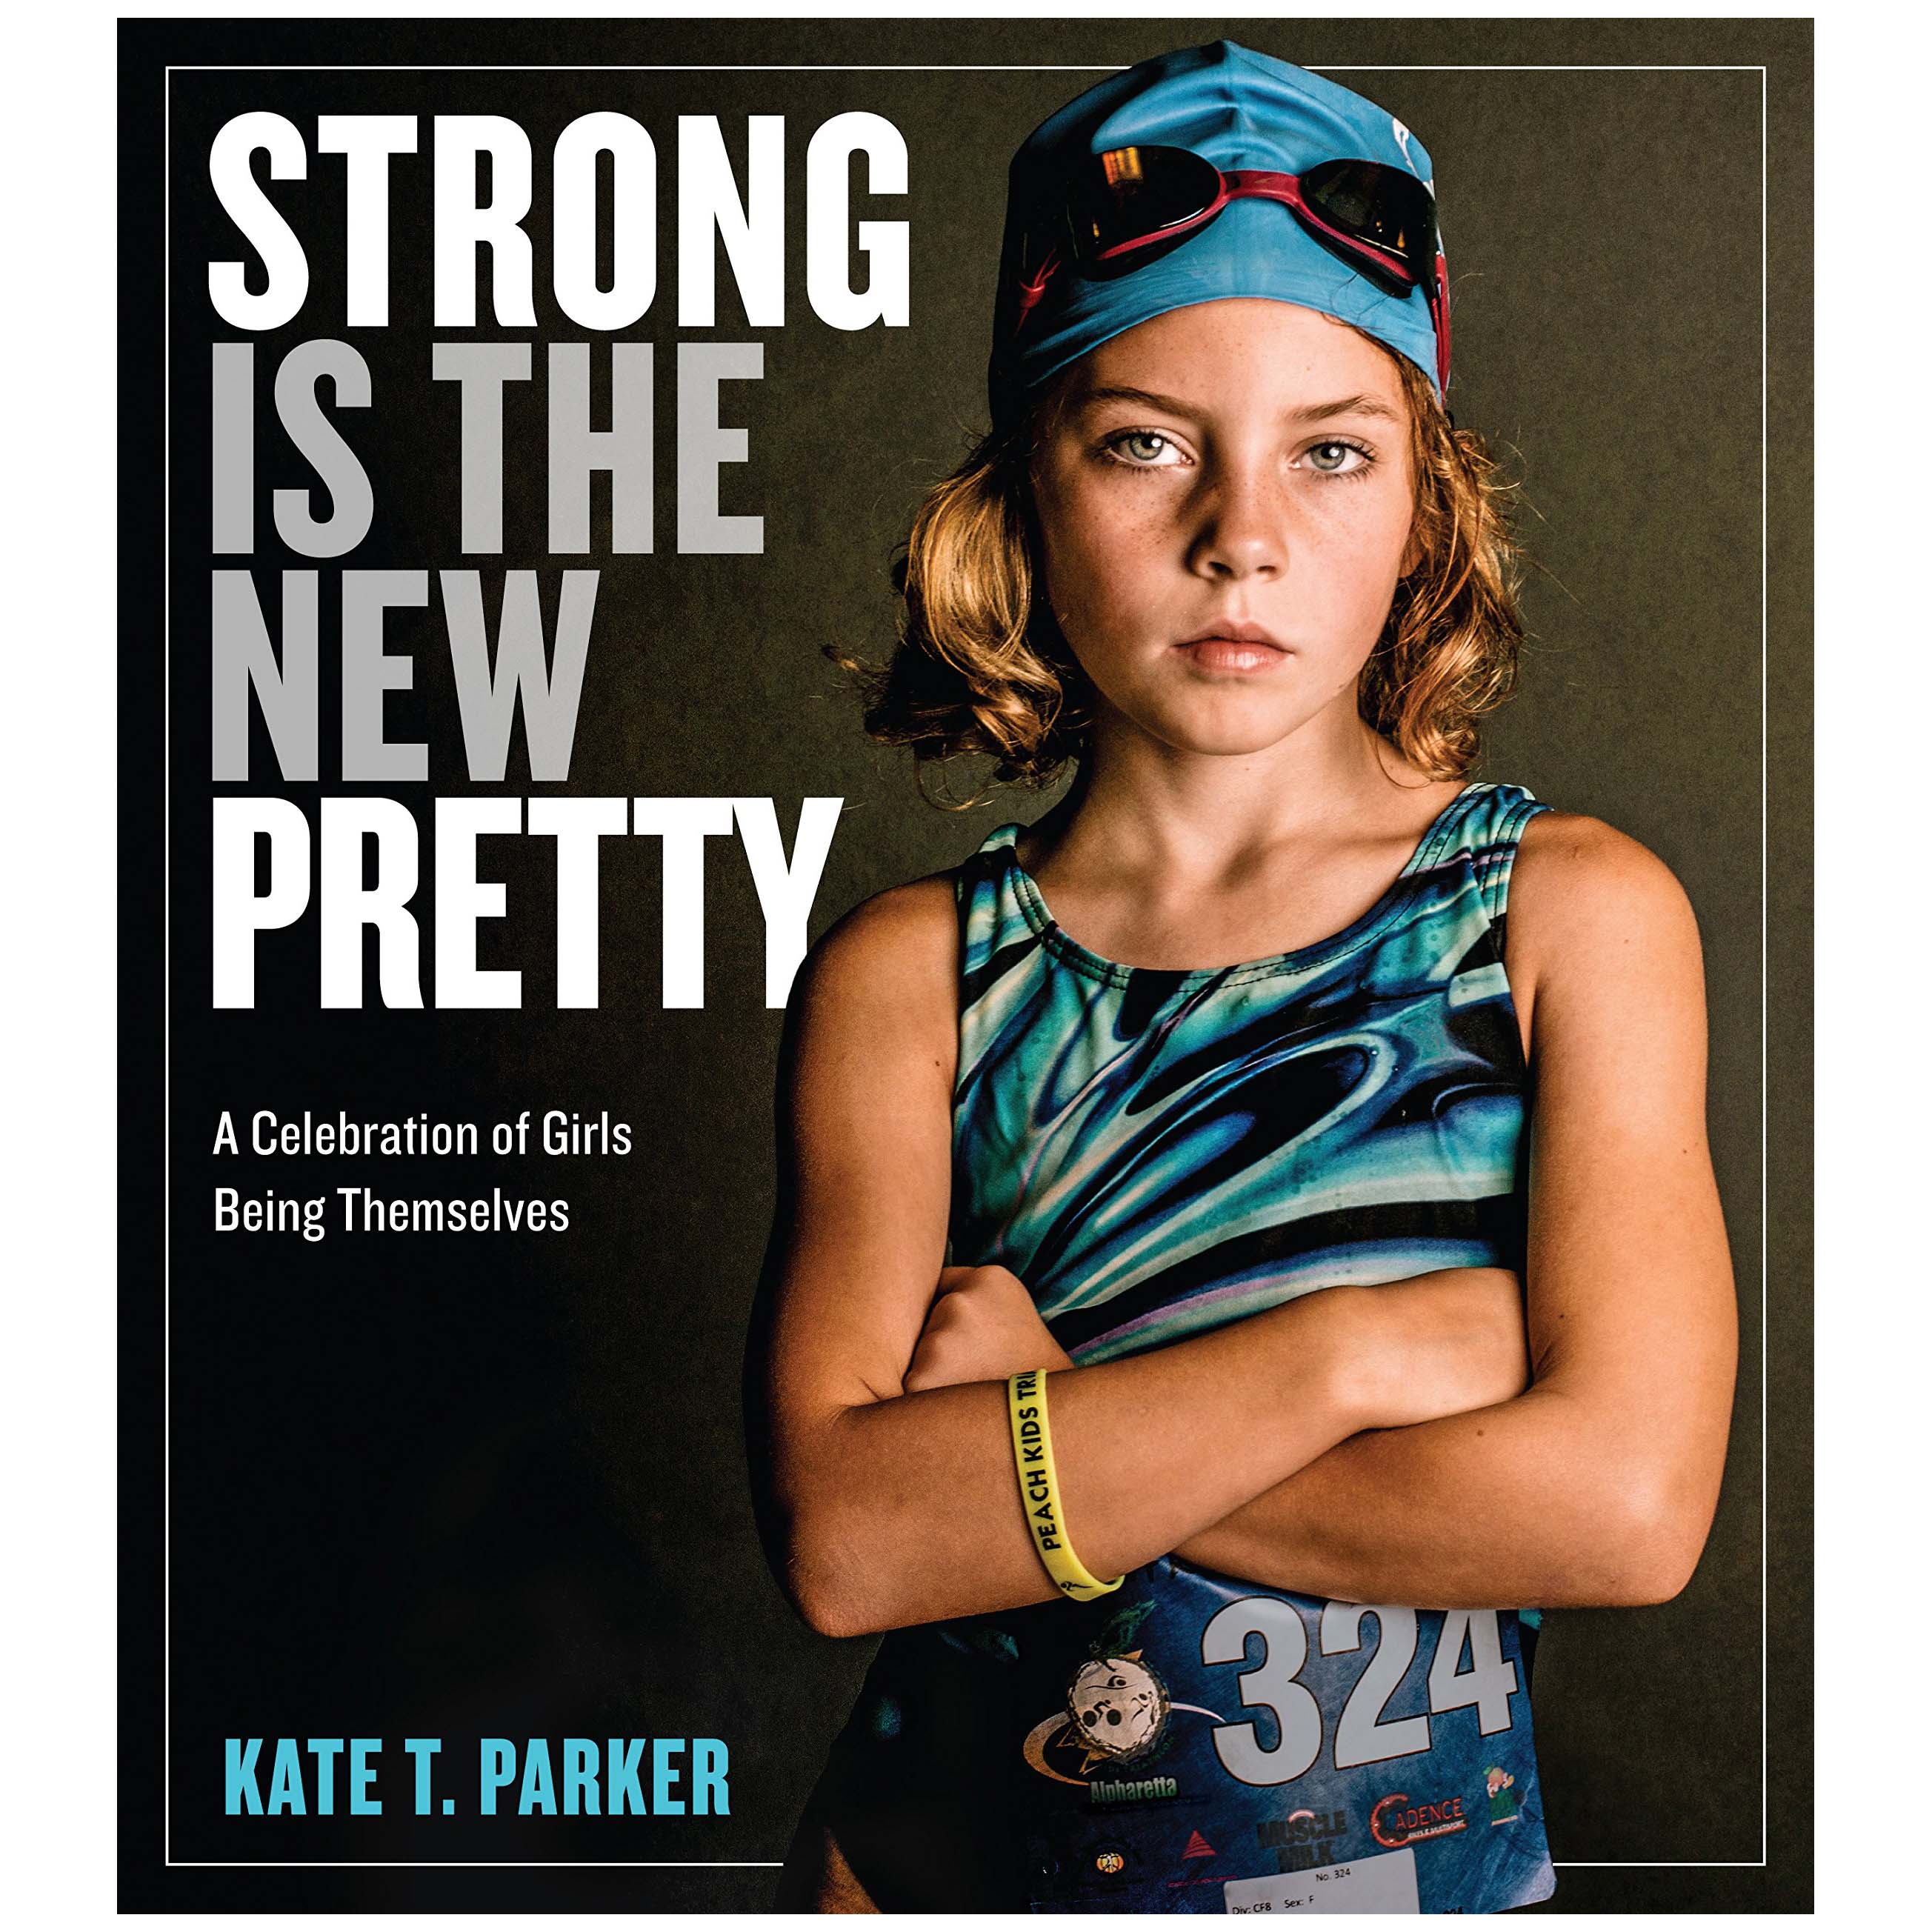 LIBRO STRONG IS THE NEW PRETTY (KATE T. PARKER) LIBROS 